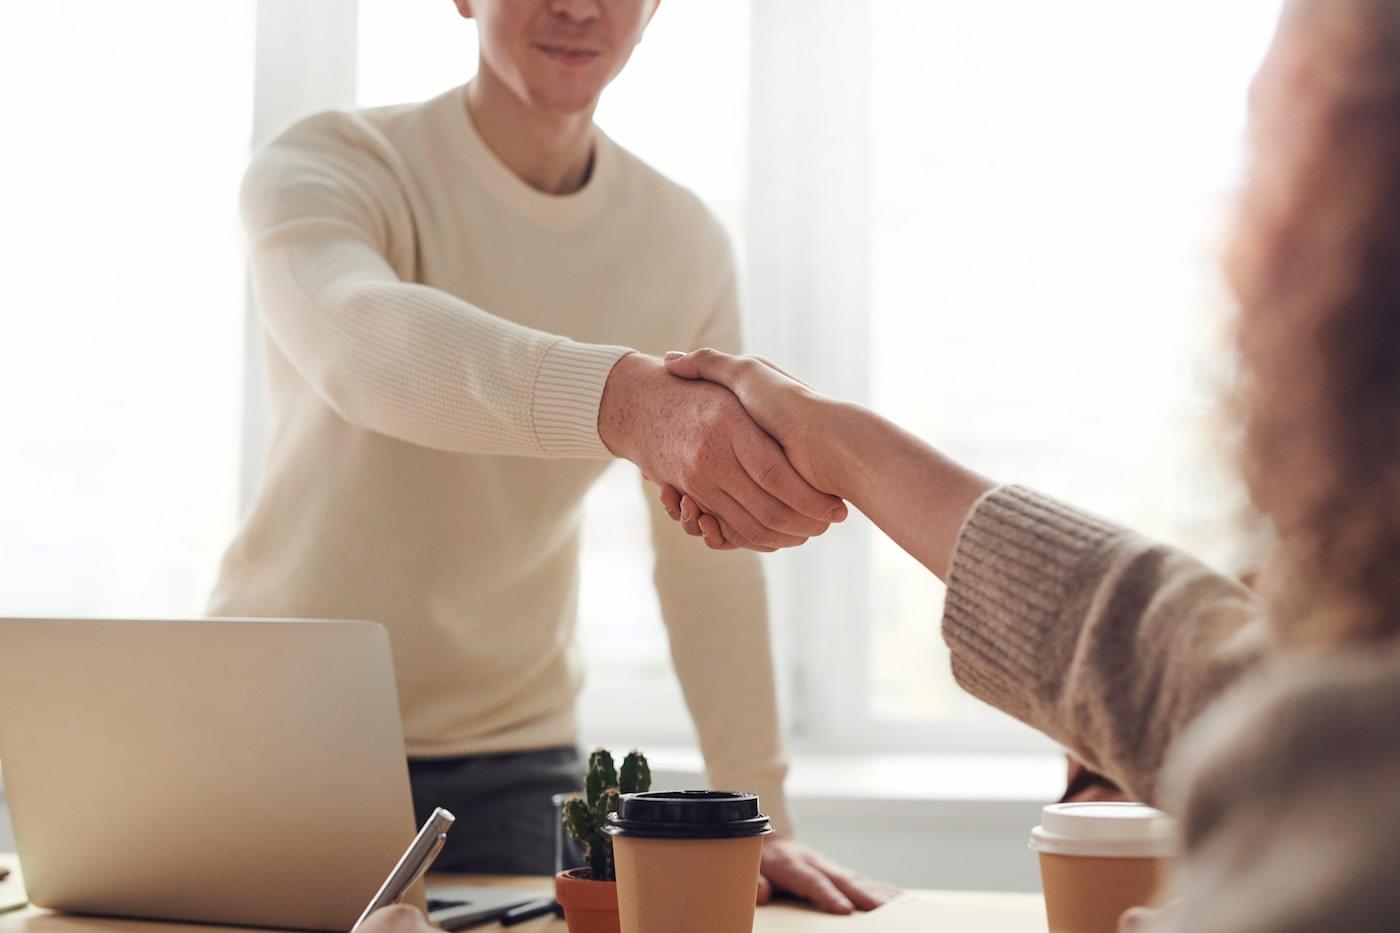 Two people shaking hands at the end of an interview.